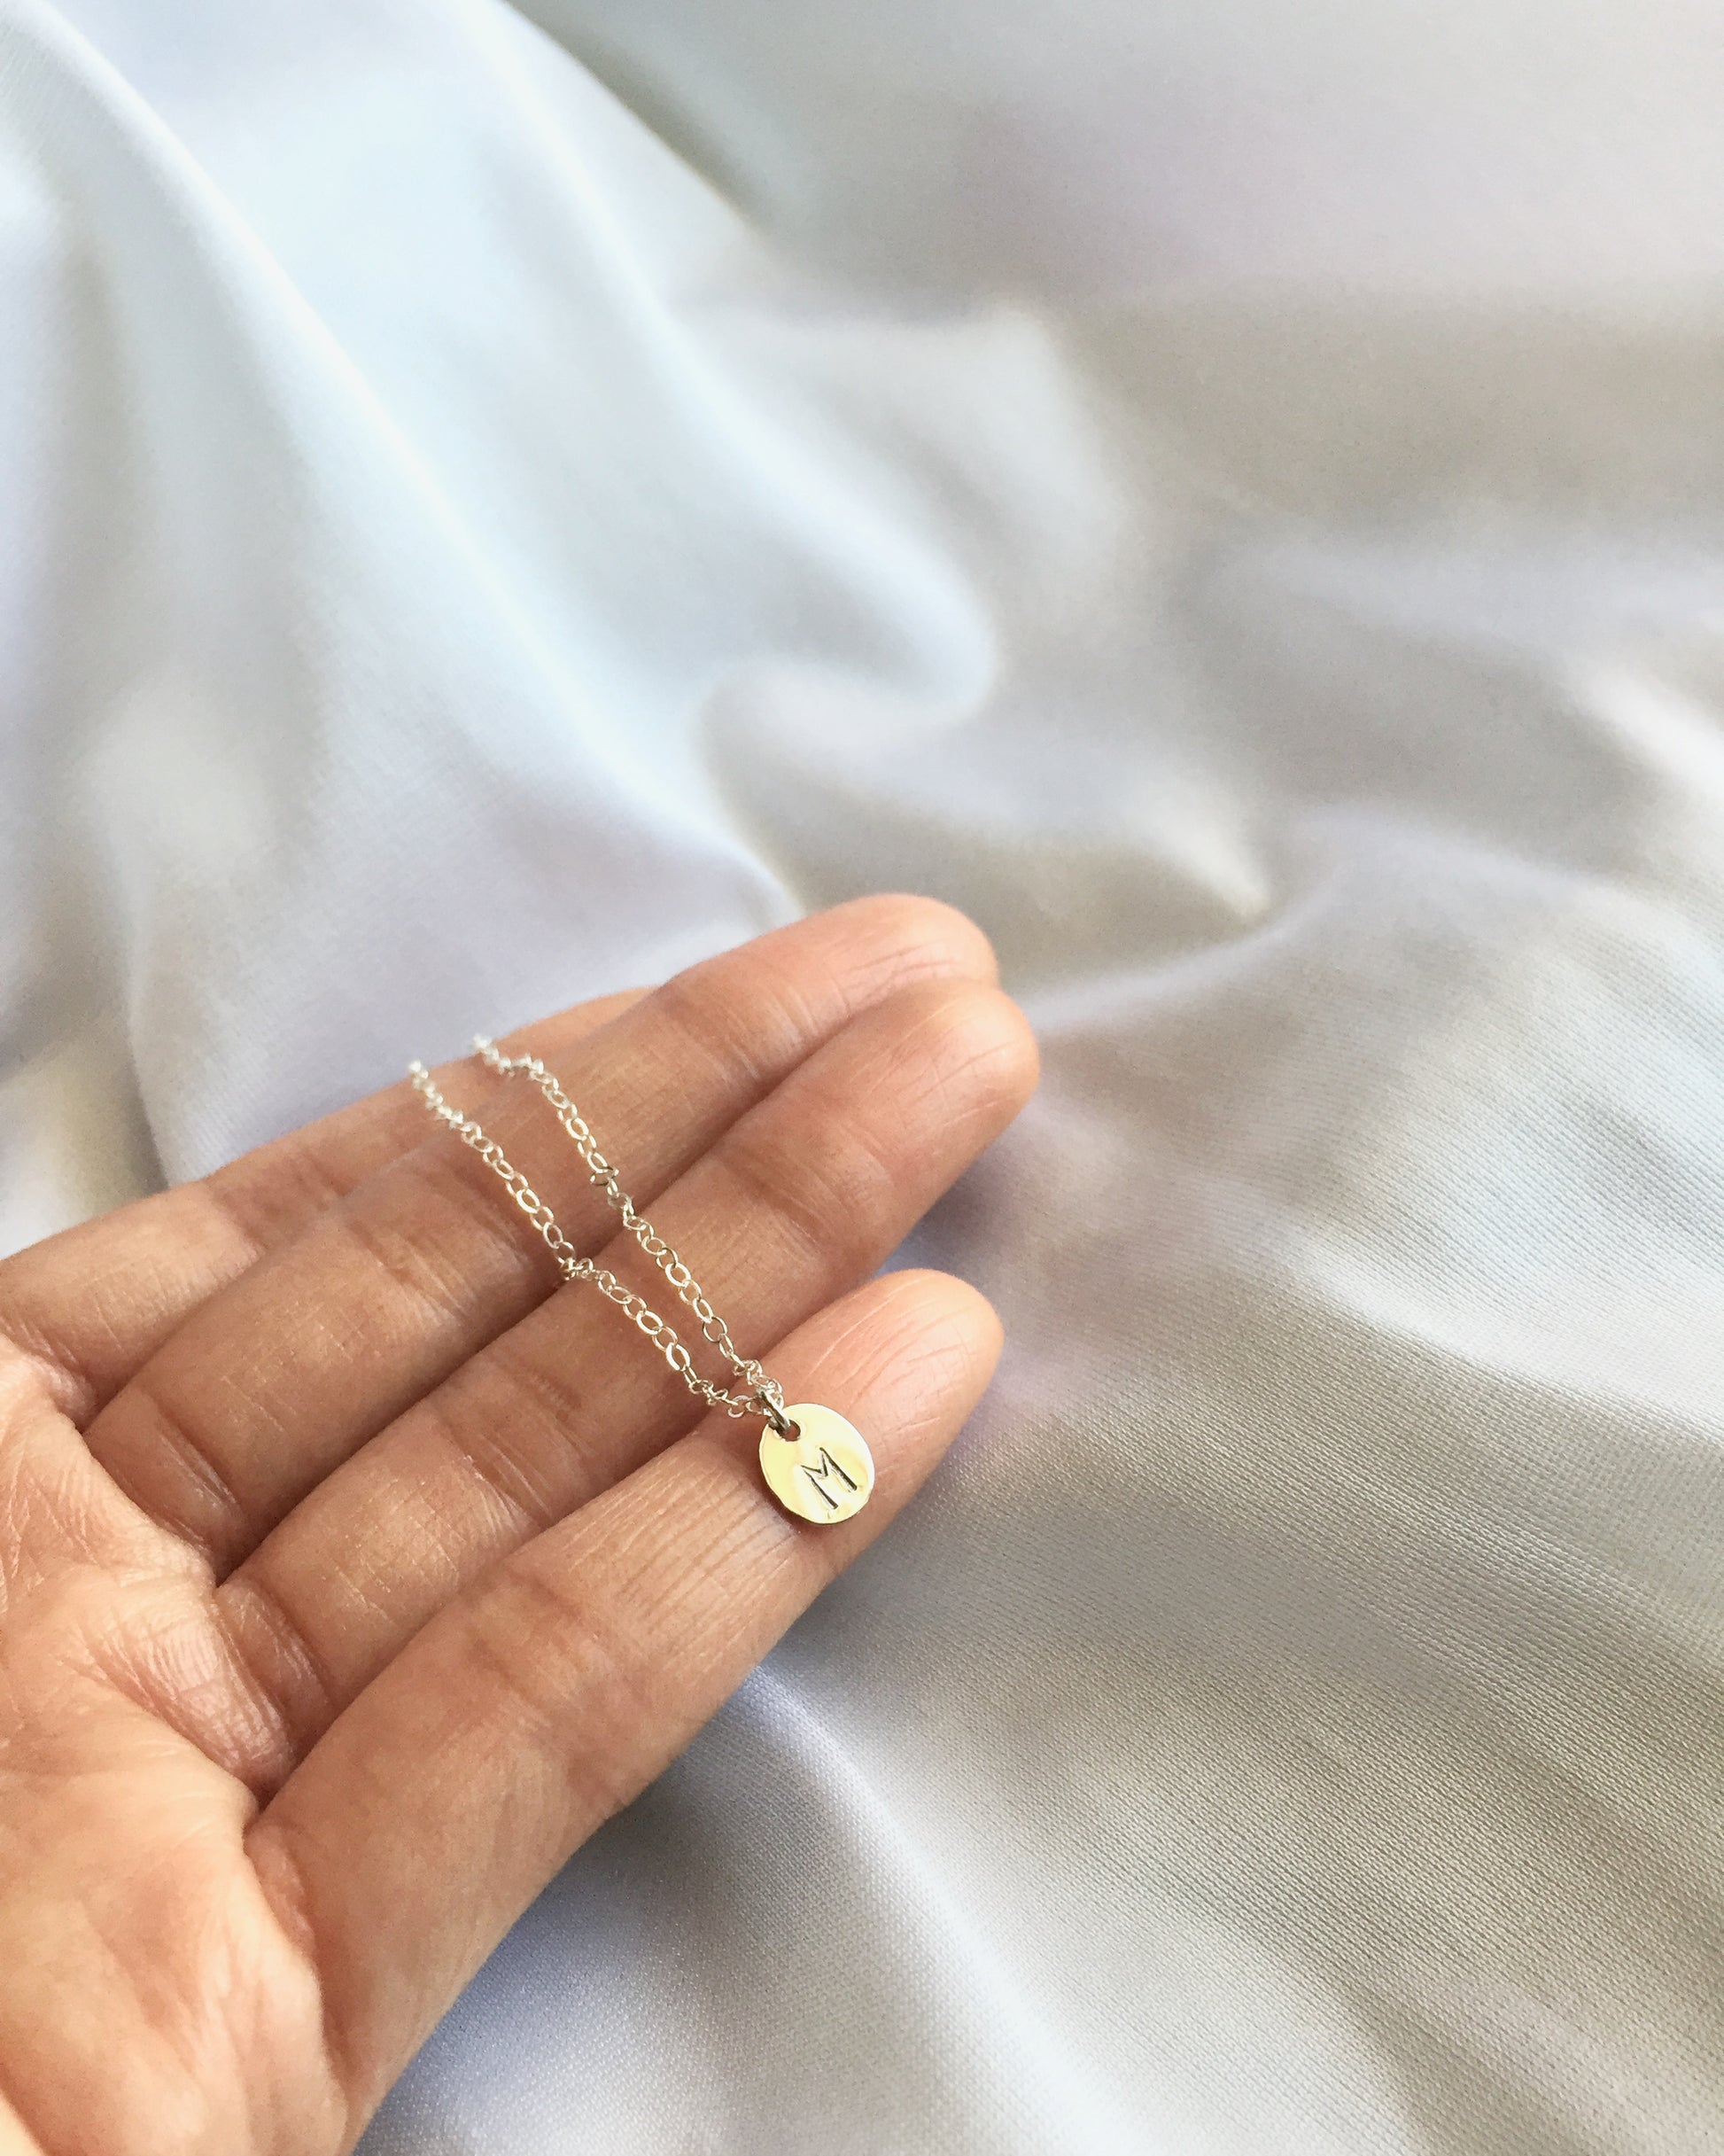 Tiny Initial Necklace In Sterling Silver or Gold Filled | Dainty Initial Necklace | IB Jewelry